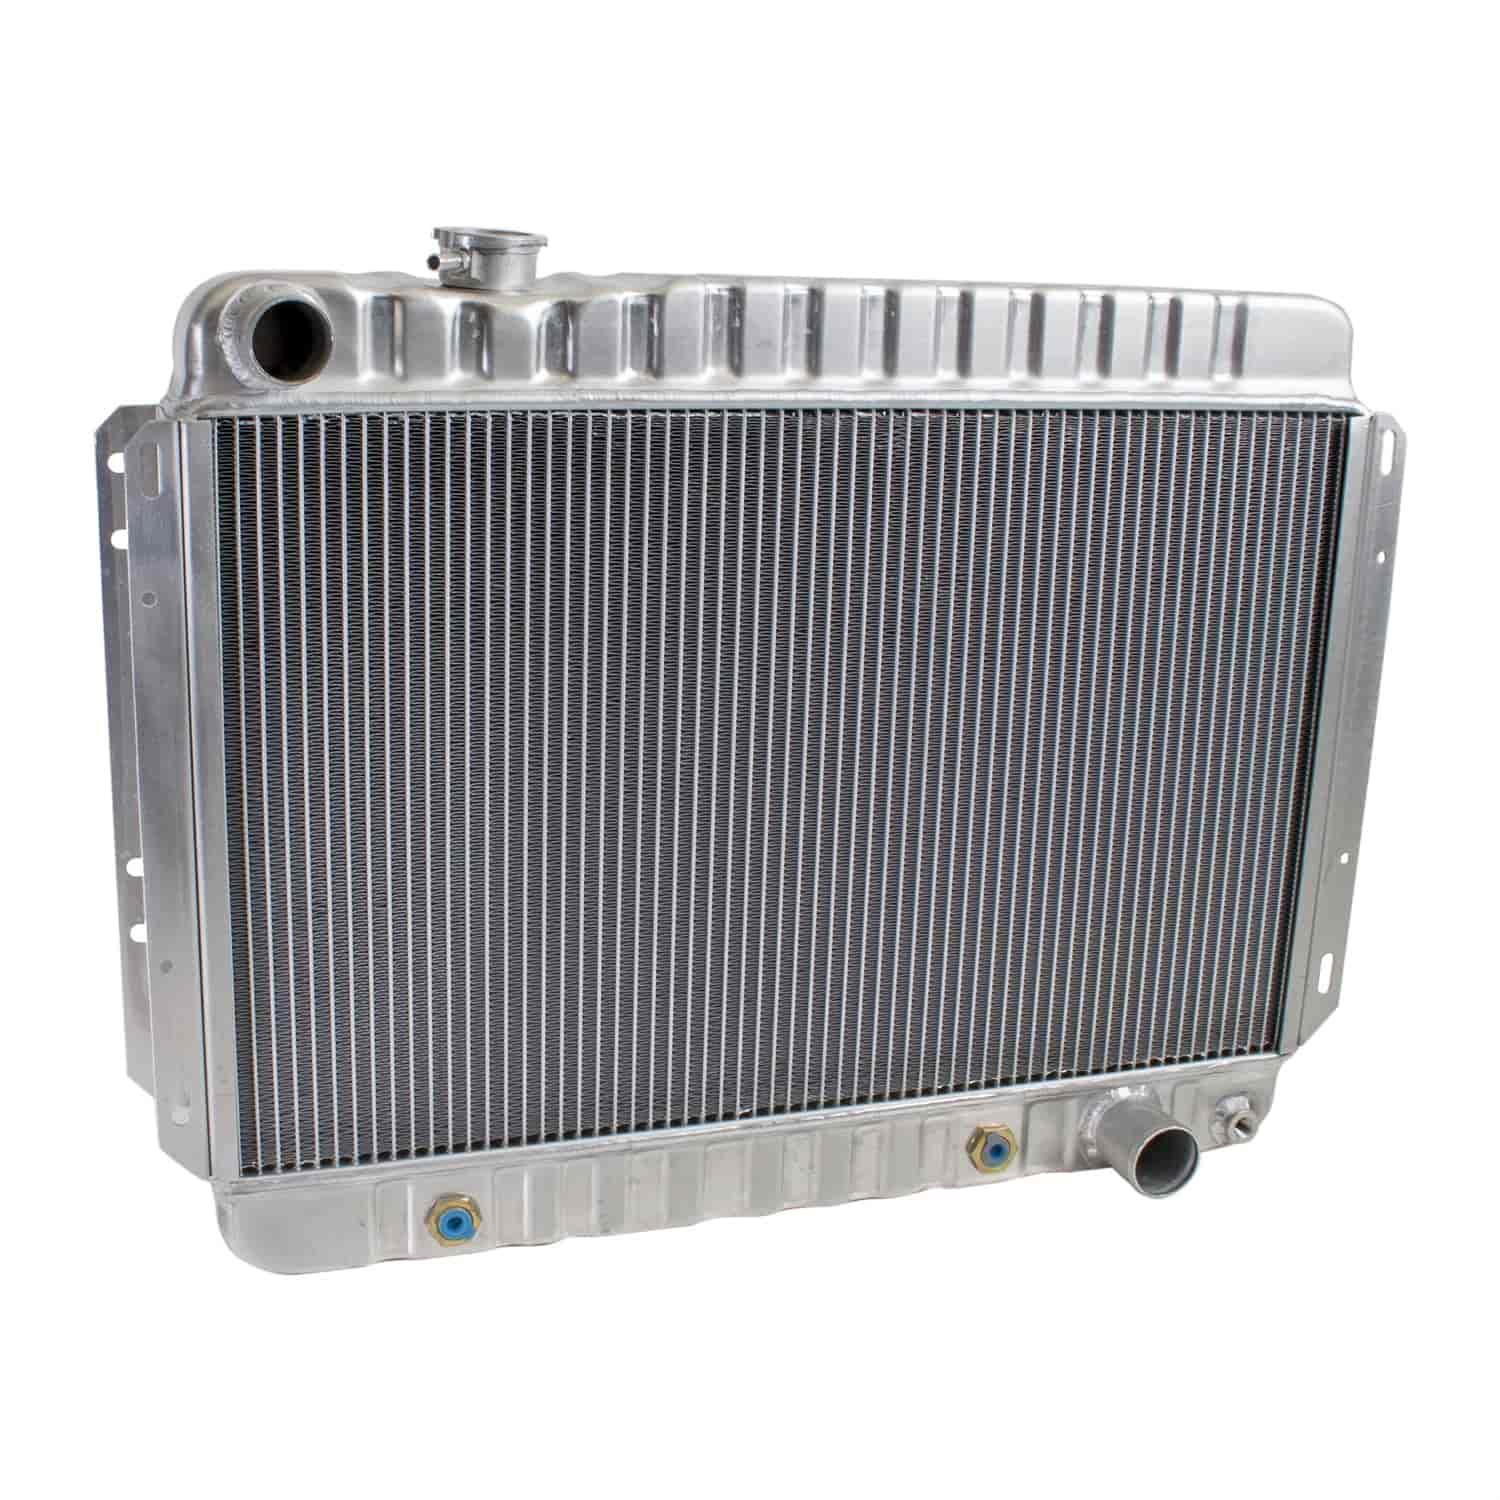 ExactFit Radiator for 1963-1967 Chevelle with Transmission Cooler